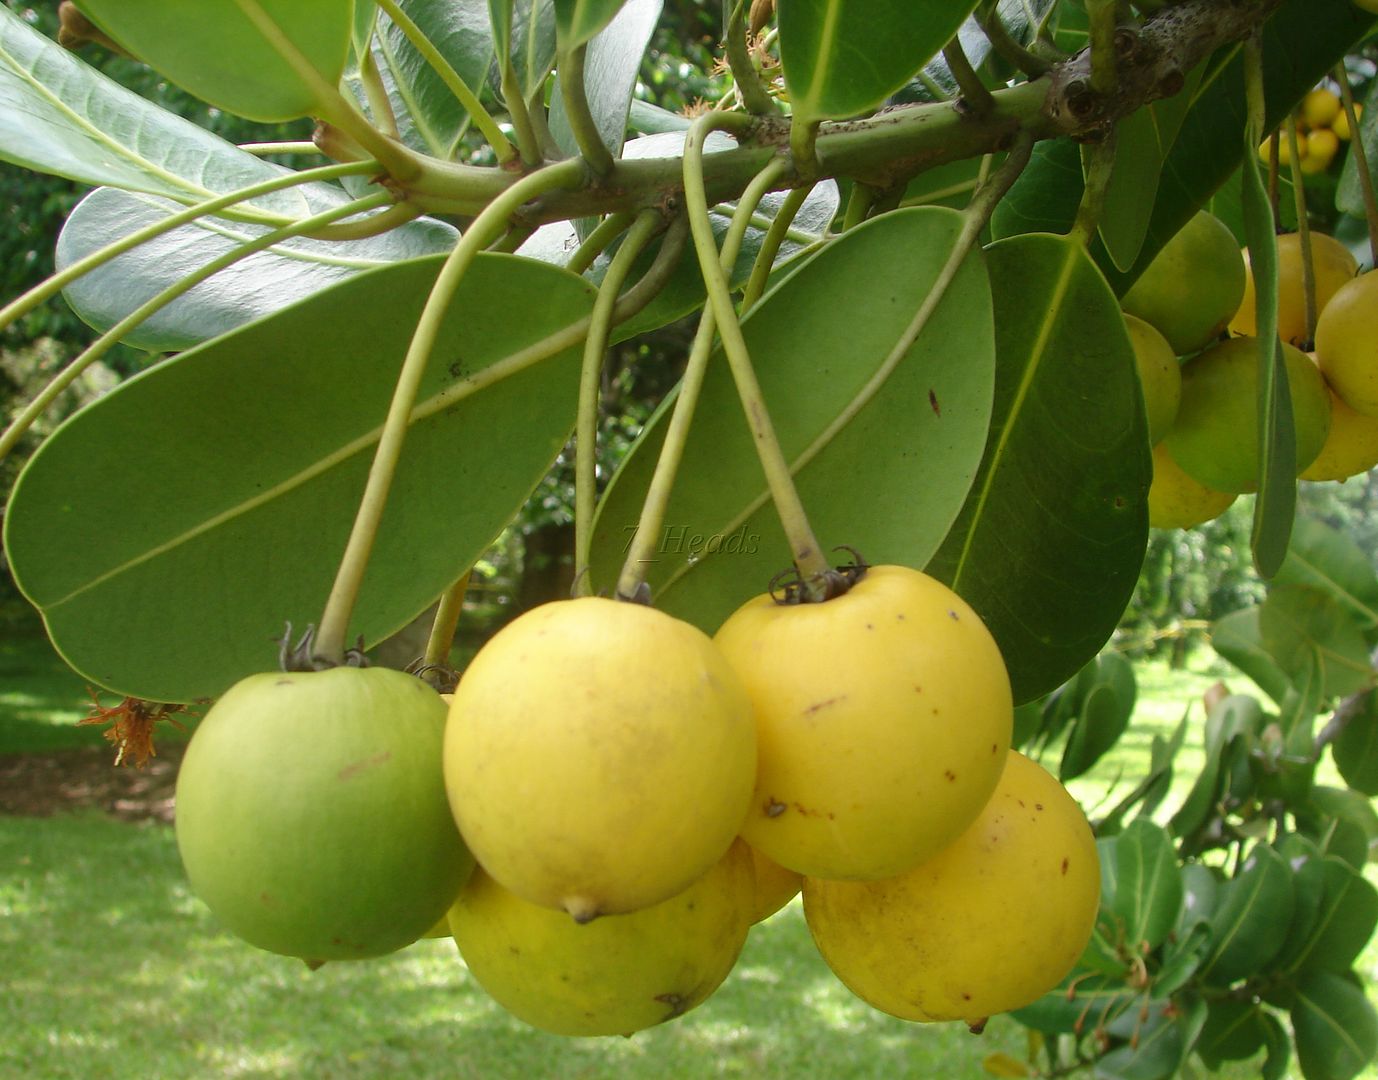 Beach Apricot Tree is a very ornamental tree with yellow-green fruits.